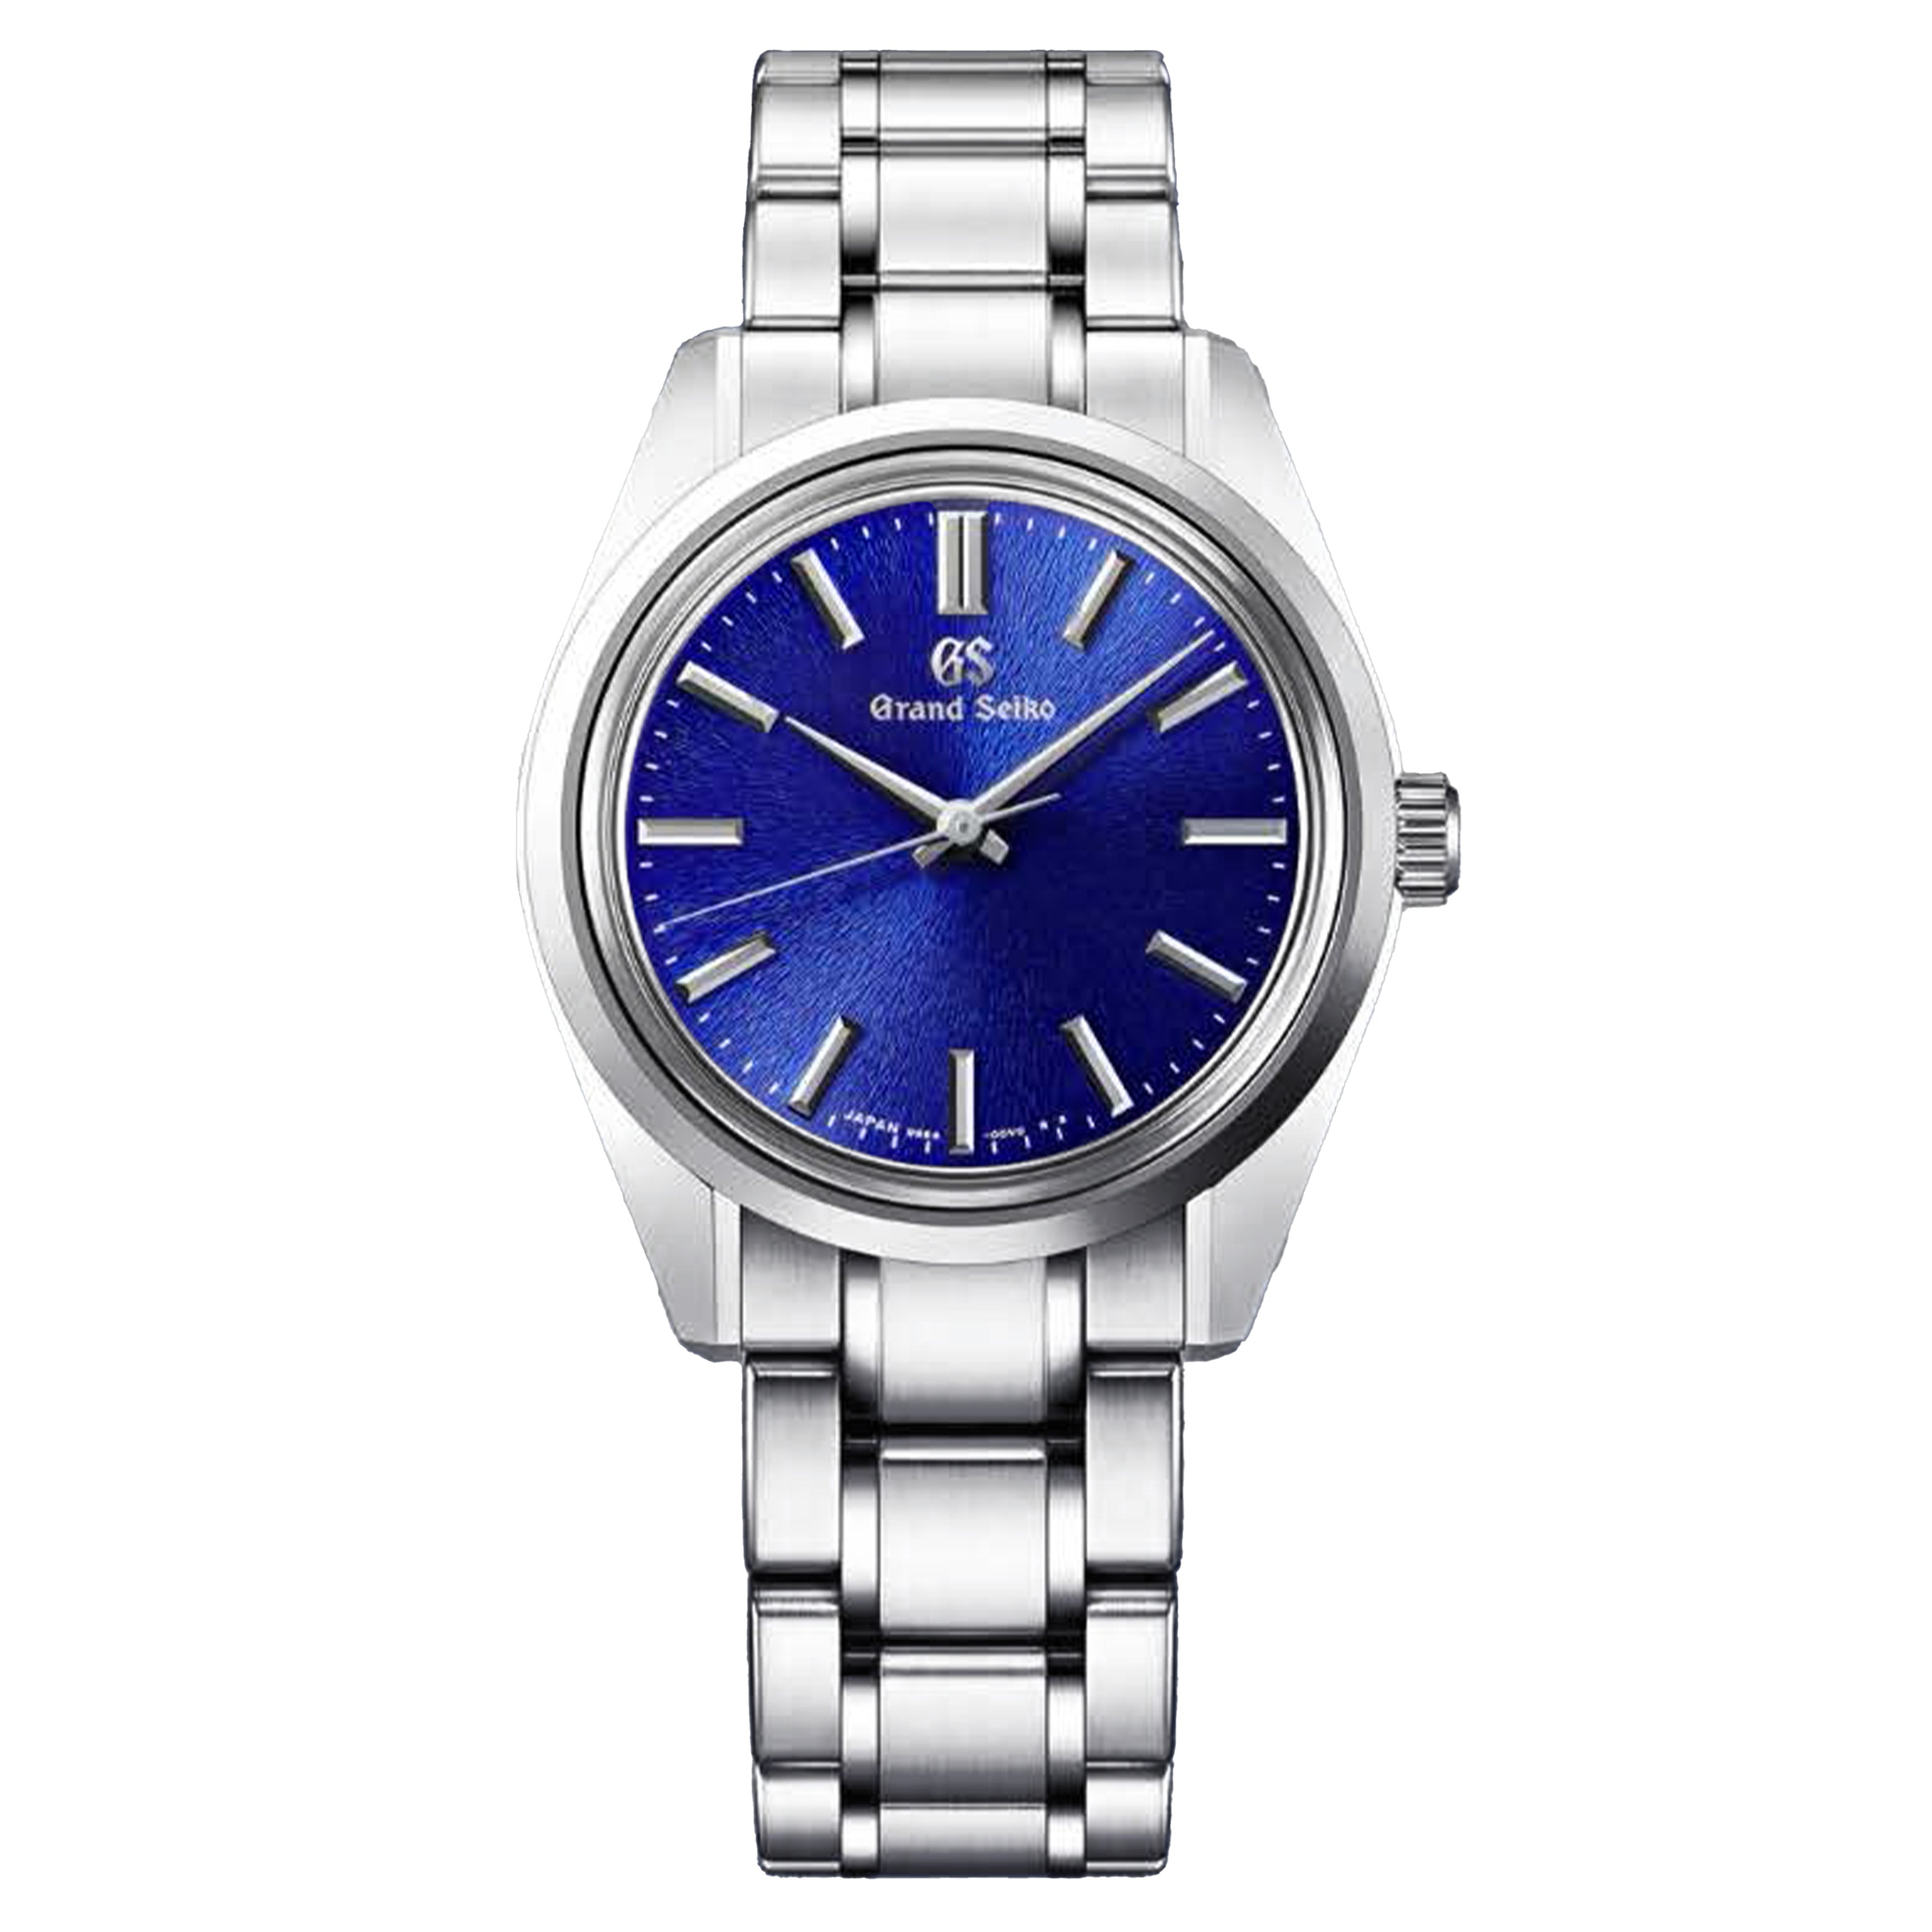 Grand Seiko Heritage 44GS GS9 Exclusive Juhyo Watch, 36.5mm Blue Dial, SBGW309